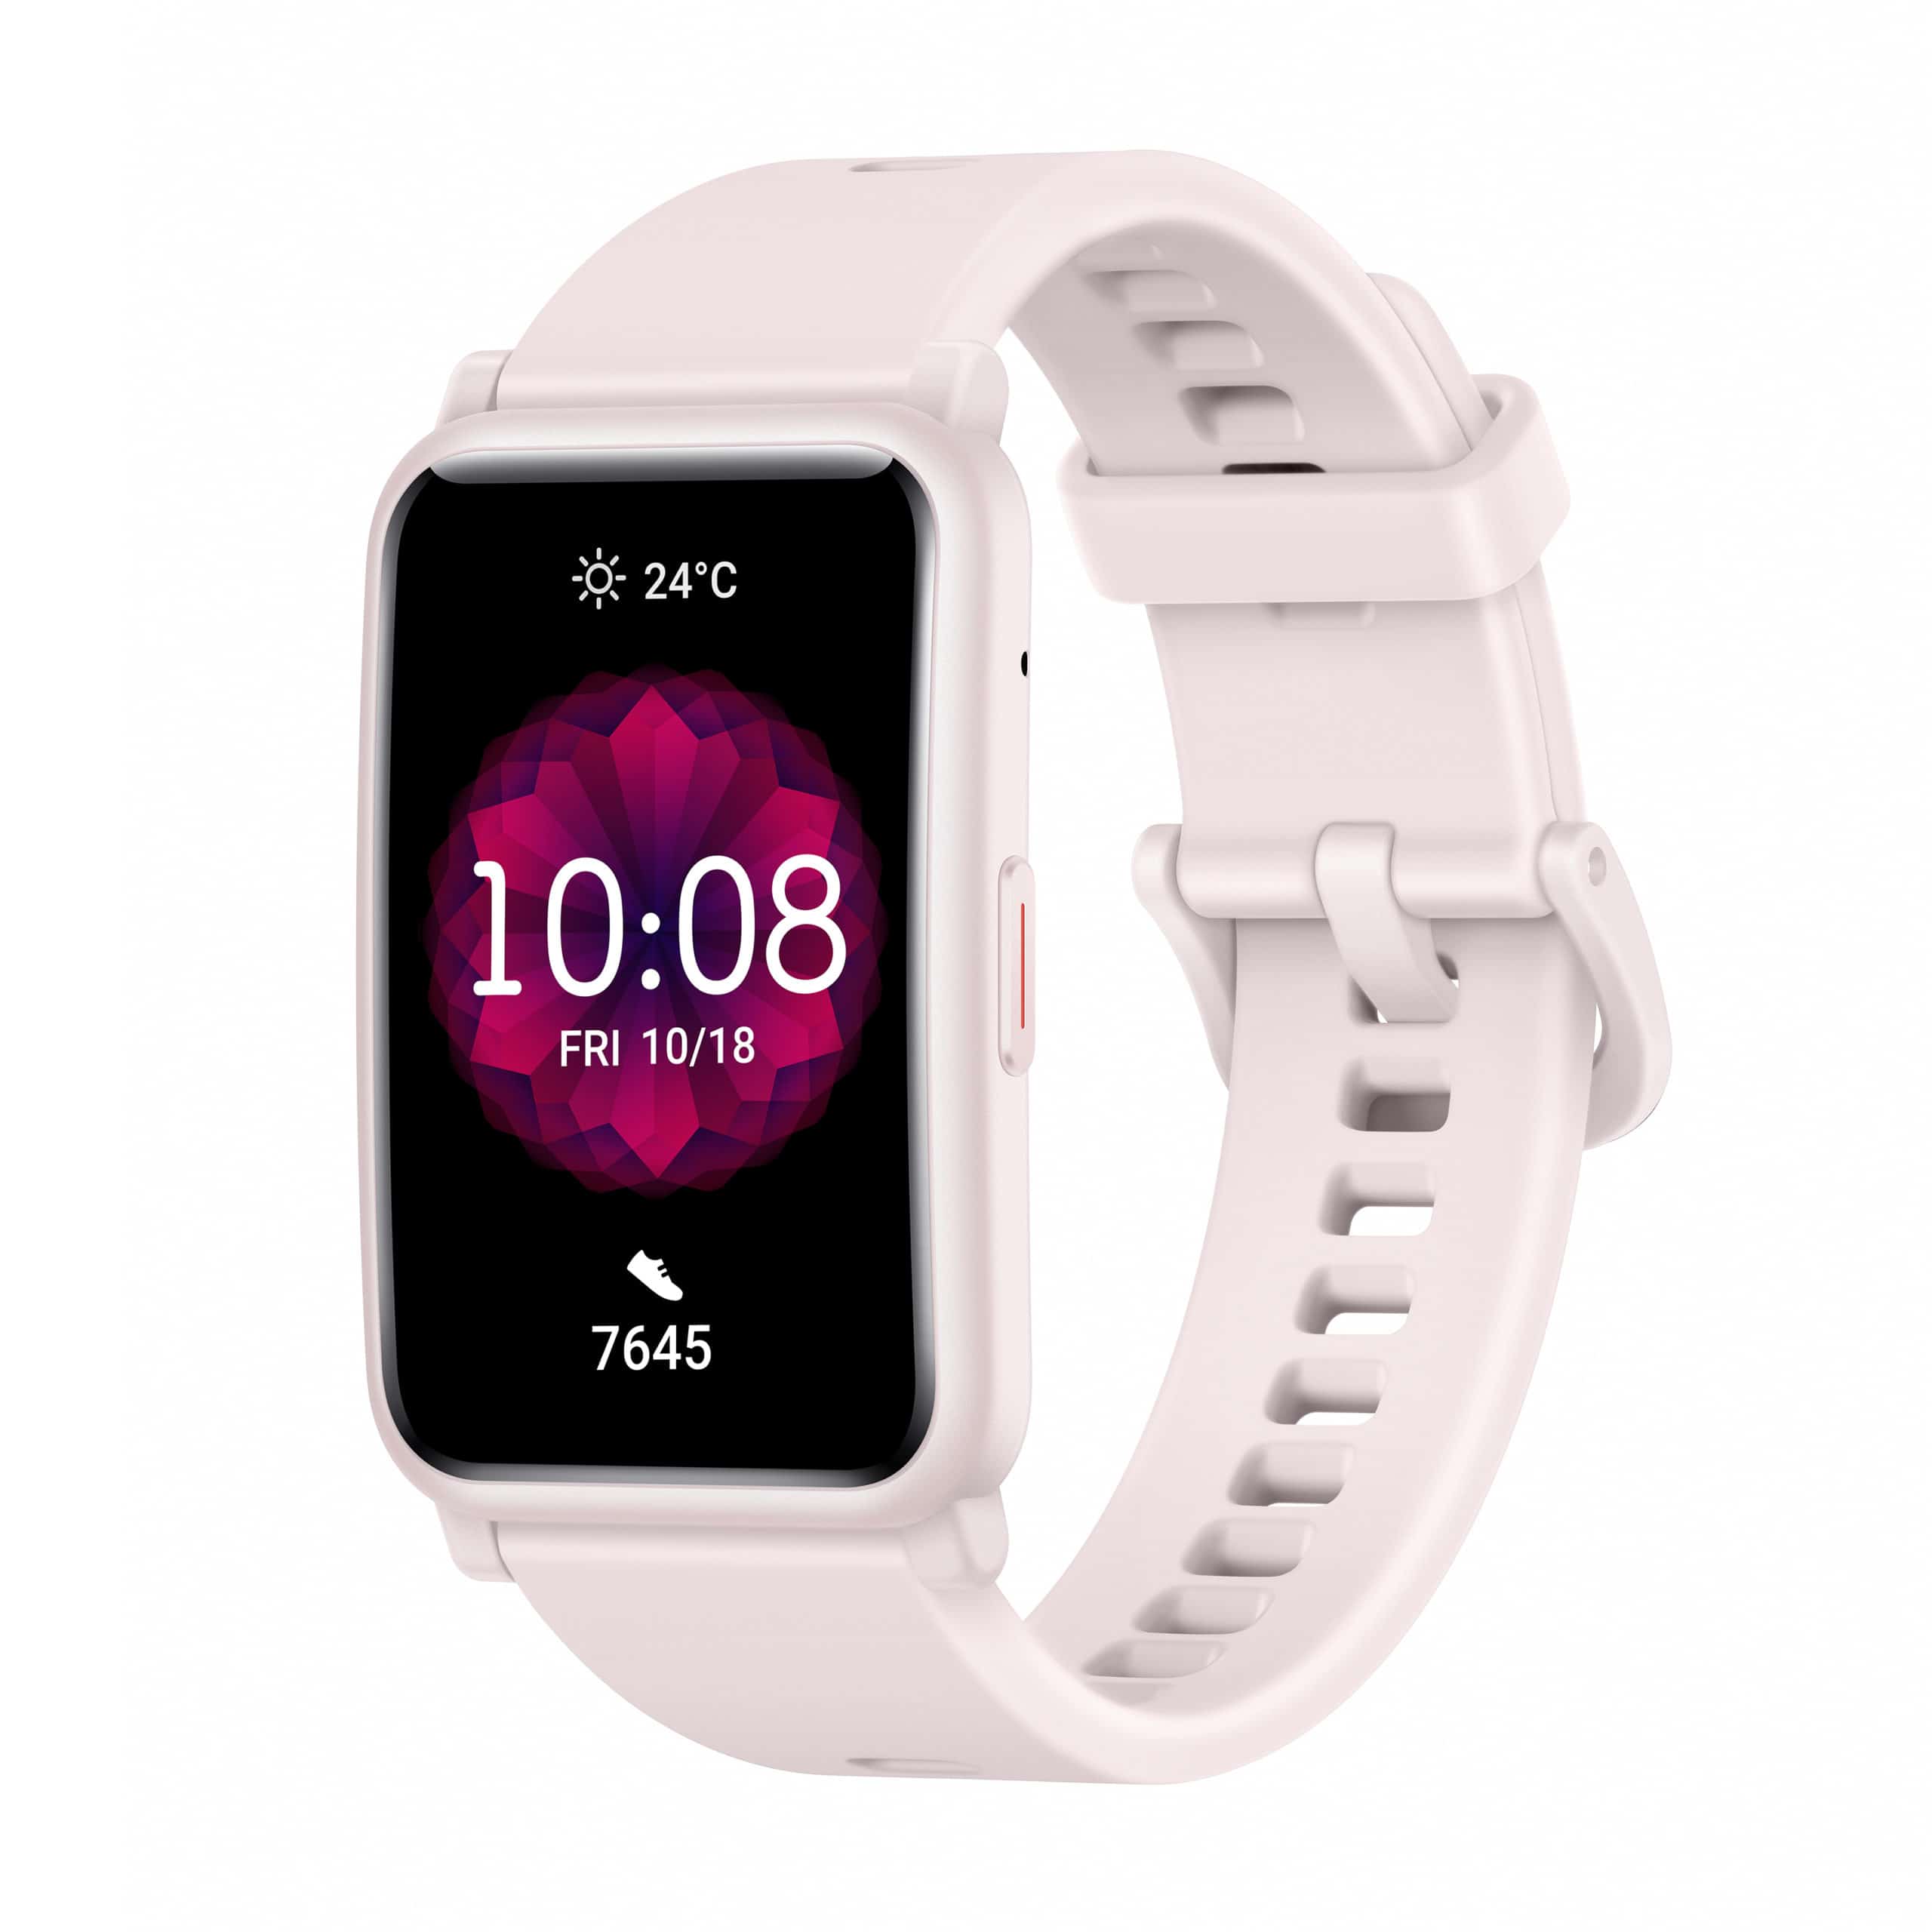 HONOR Announces Two New Wearables Coming to the UAE